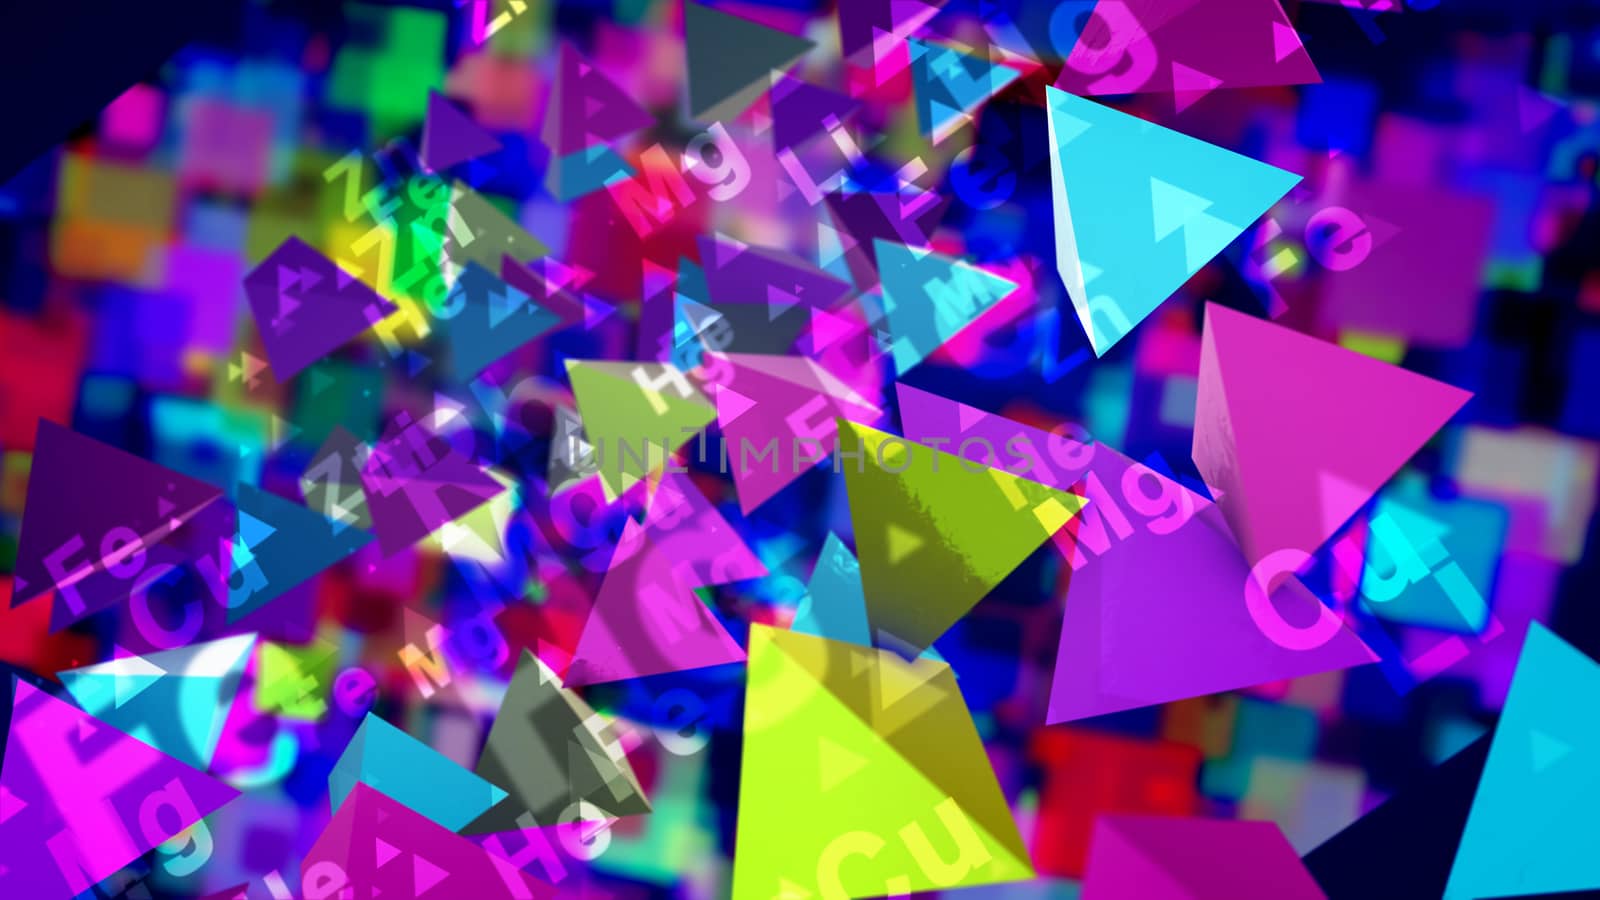 A hilarious 3d illustration of sparkling multicolored pyramids with the signs of chemical elements flying and playing in the black background. They generate the mood of joy, optinism and fun.